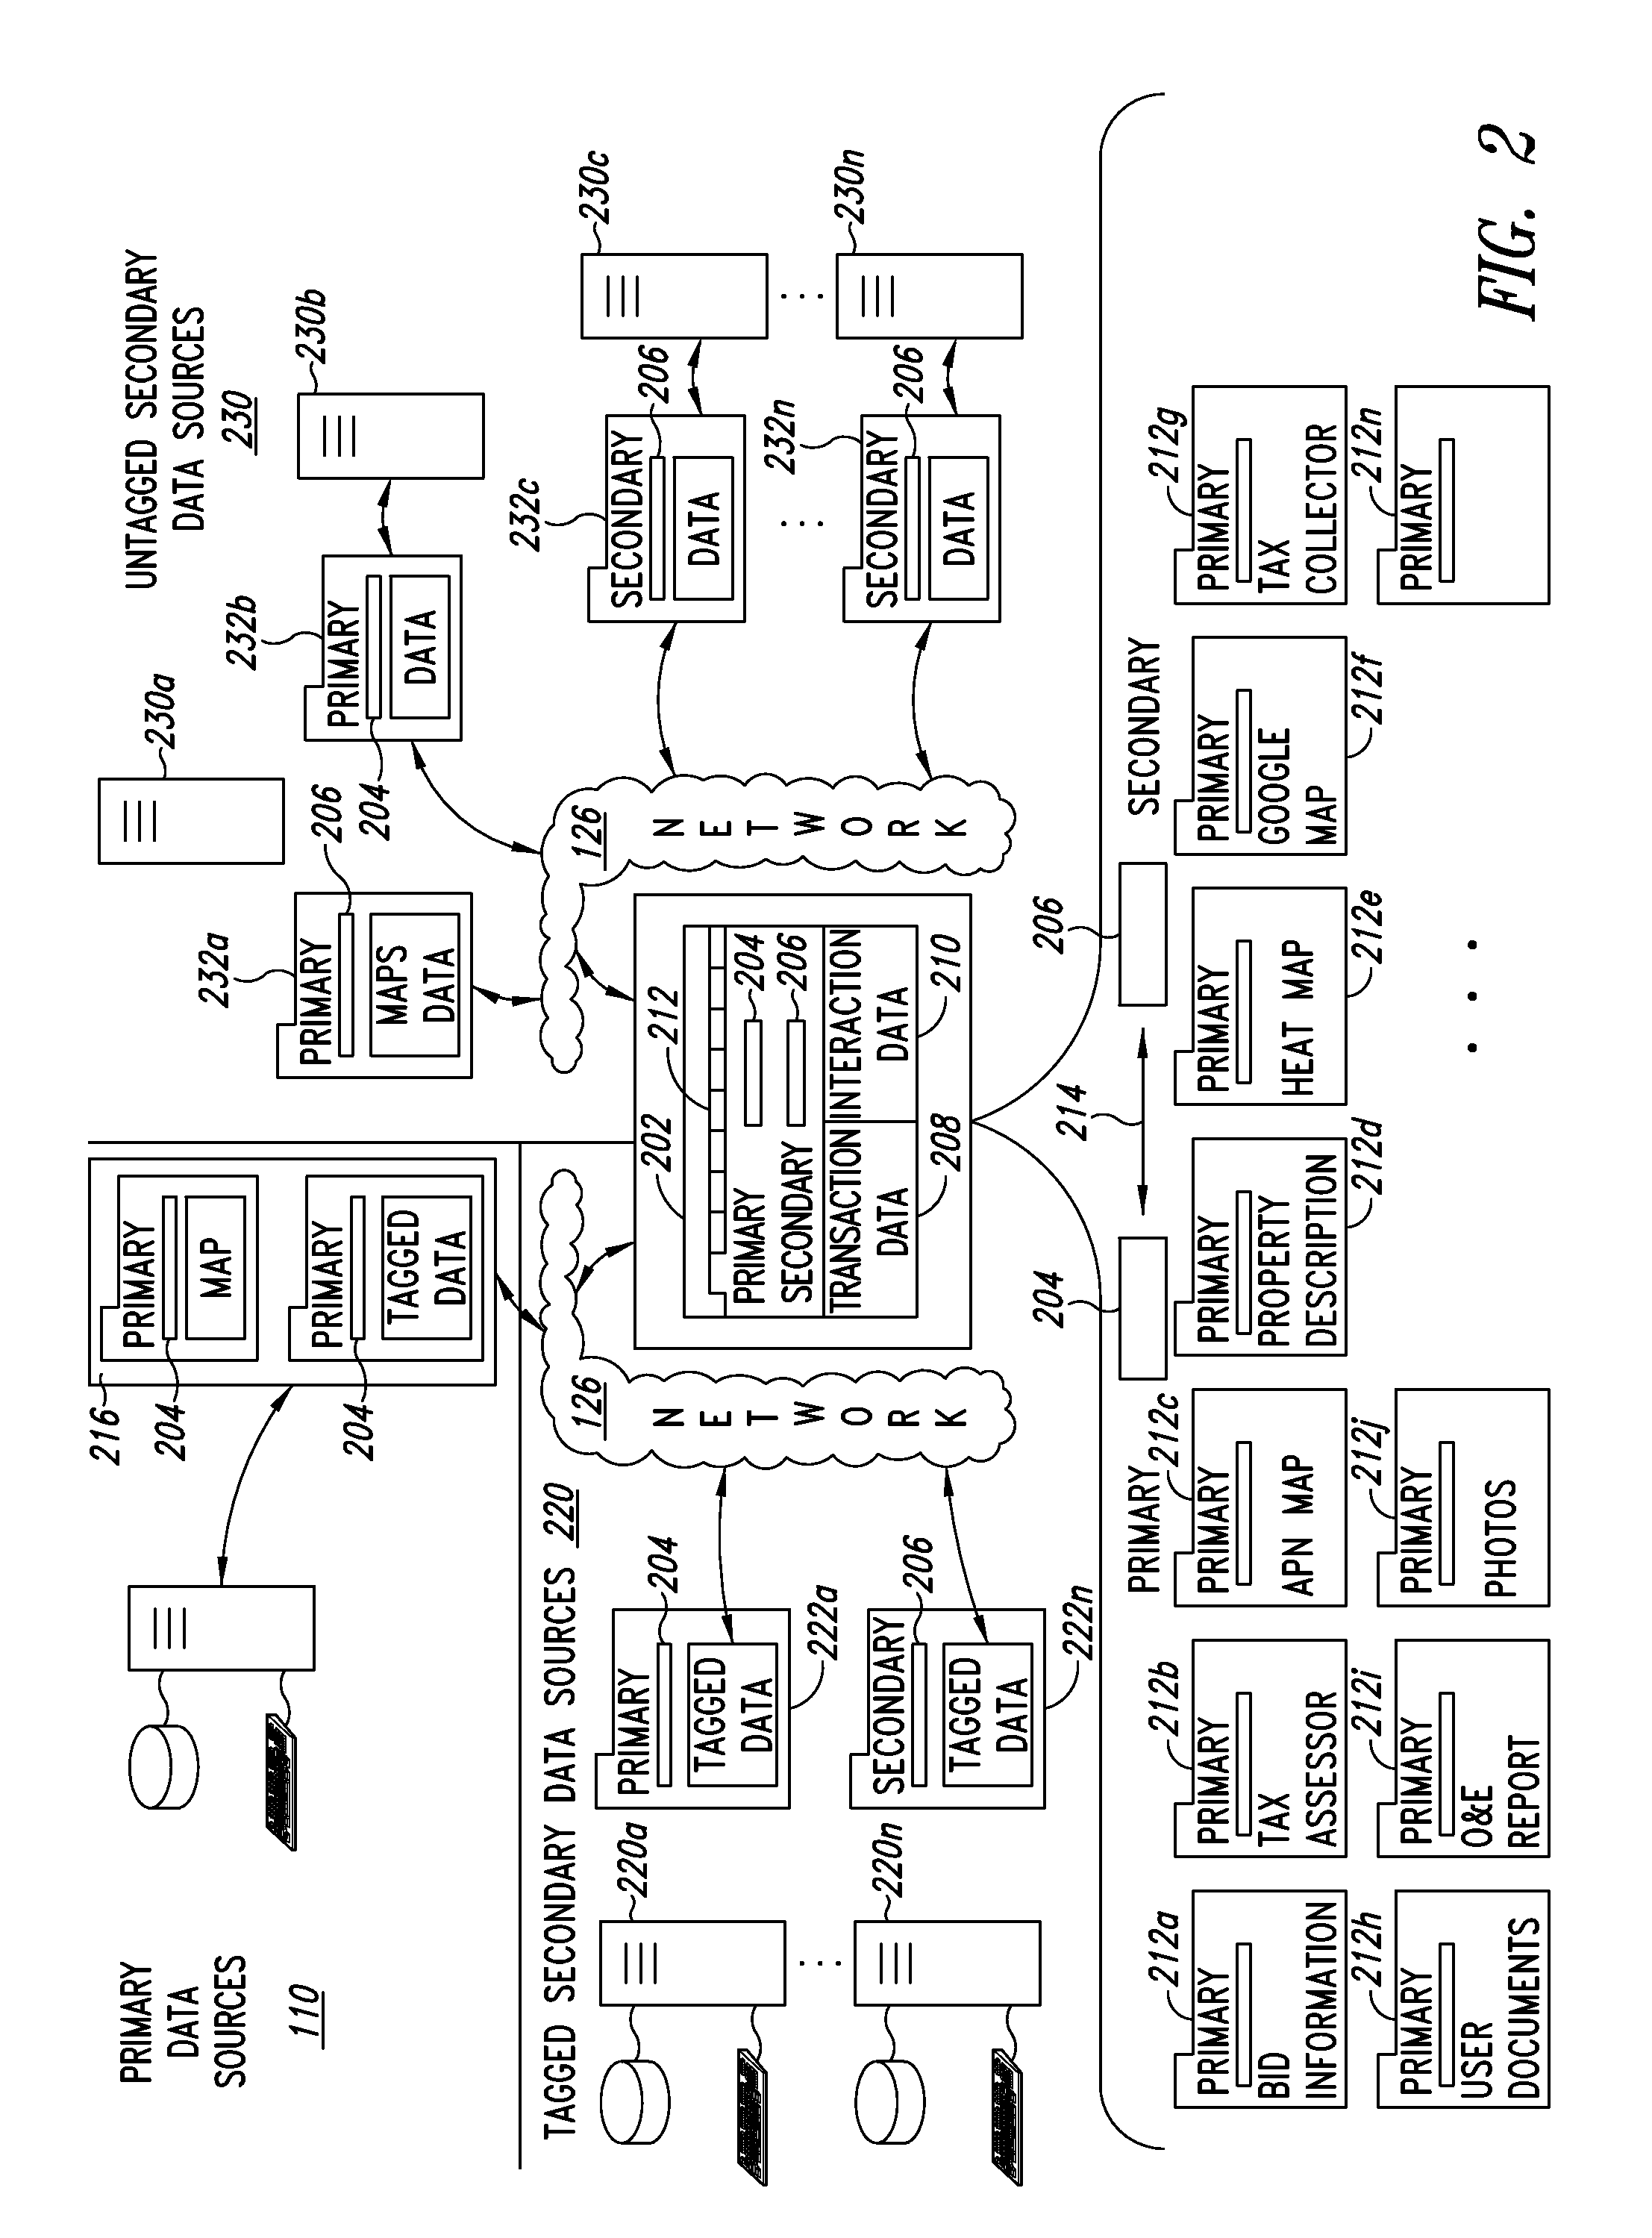 Parcel data collection and analysis systems, devices, and methods